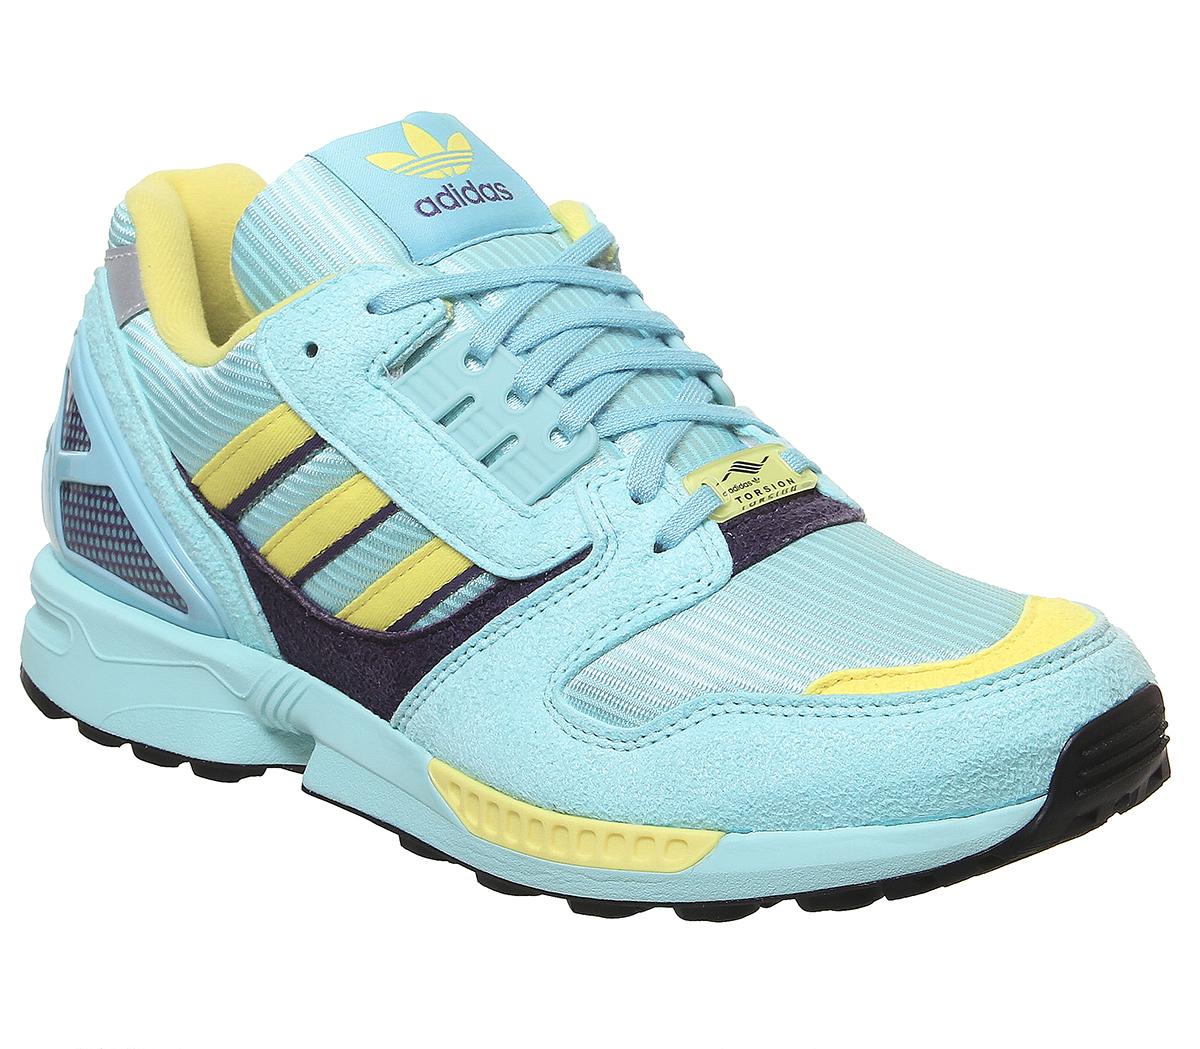 adidas zx 8000 aqua size 10 OFF-61% >Free Delivery